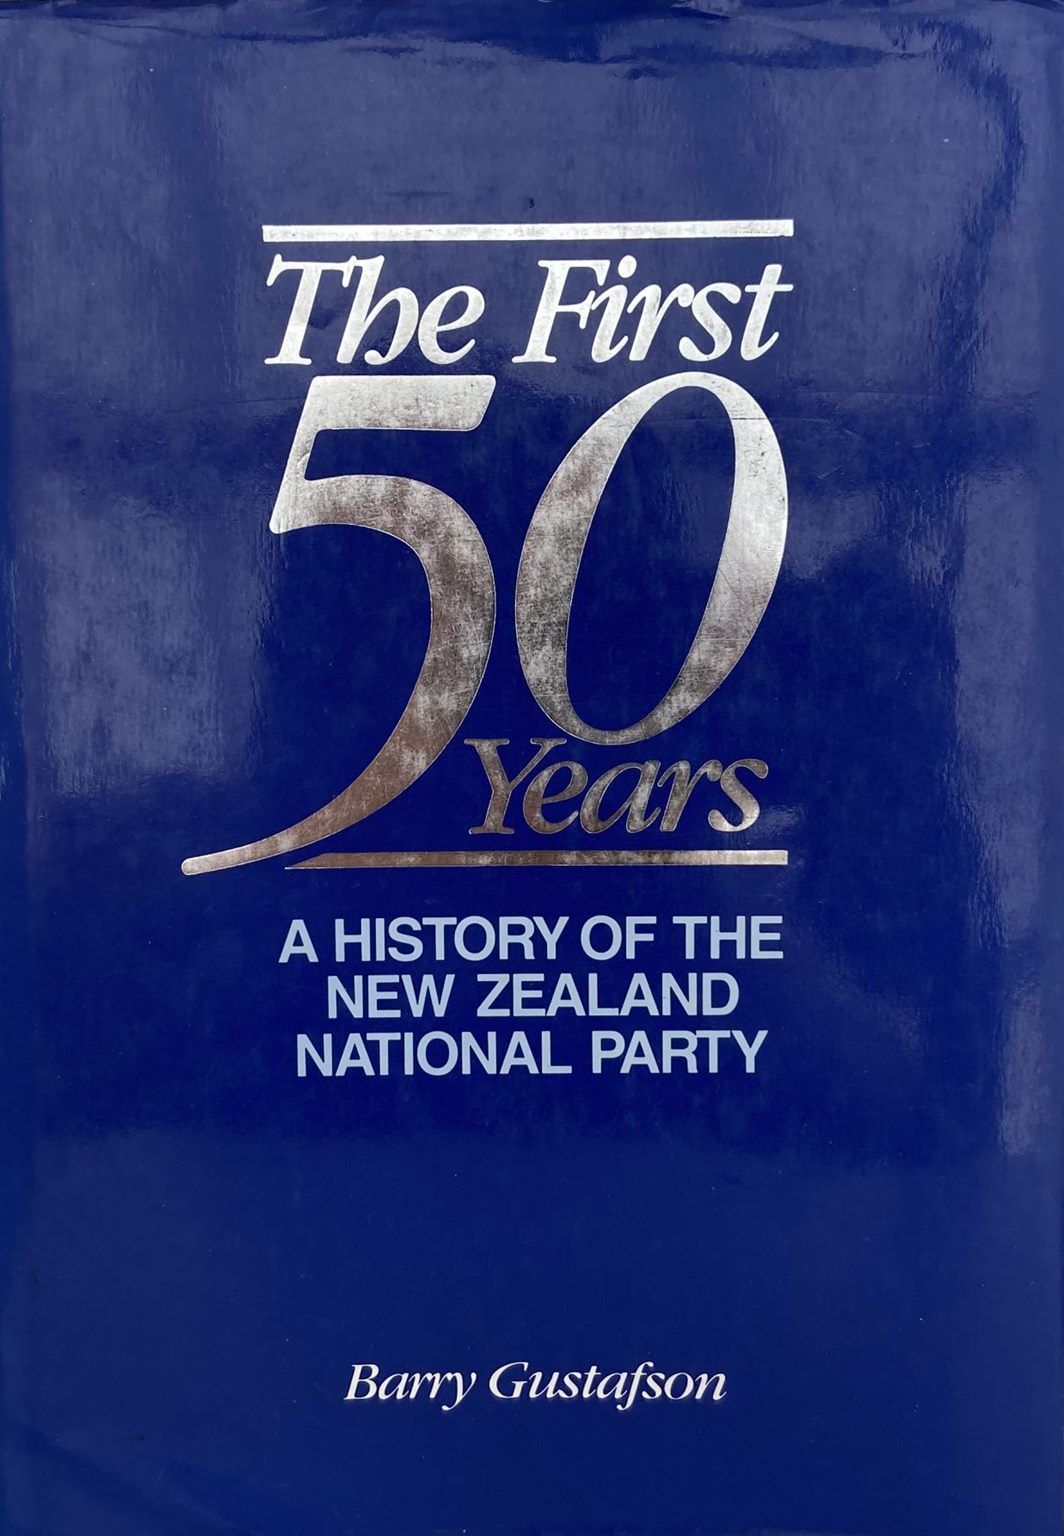 NEW ZEALAND NATIONAL PARTY: The First 50 Years